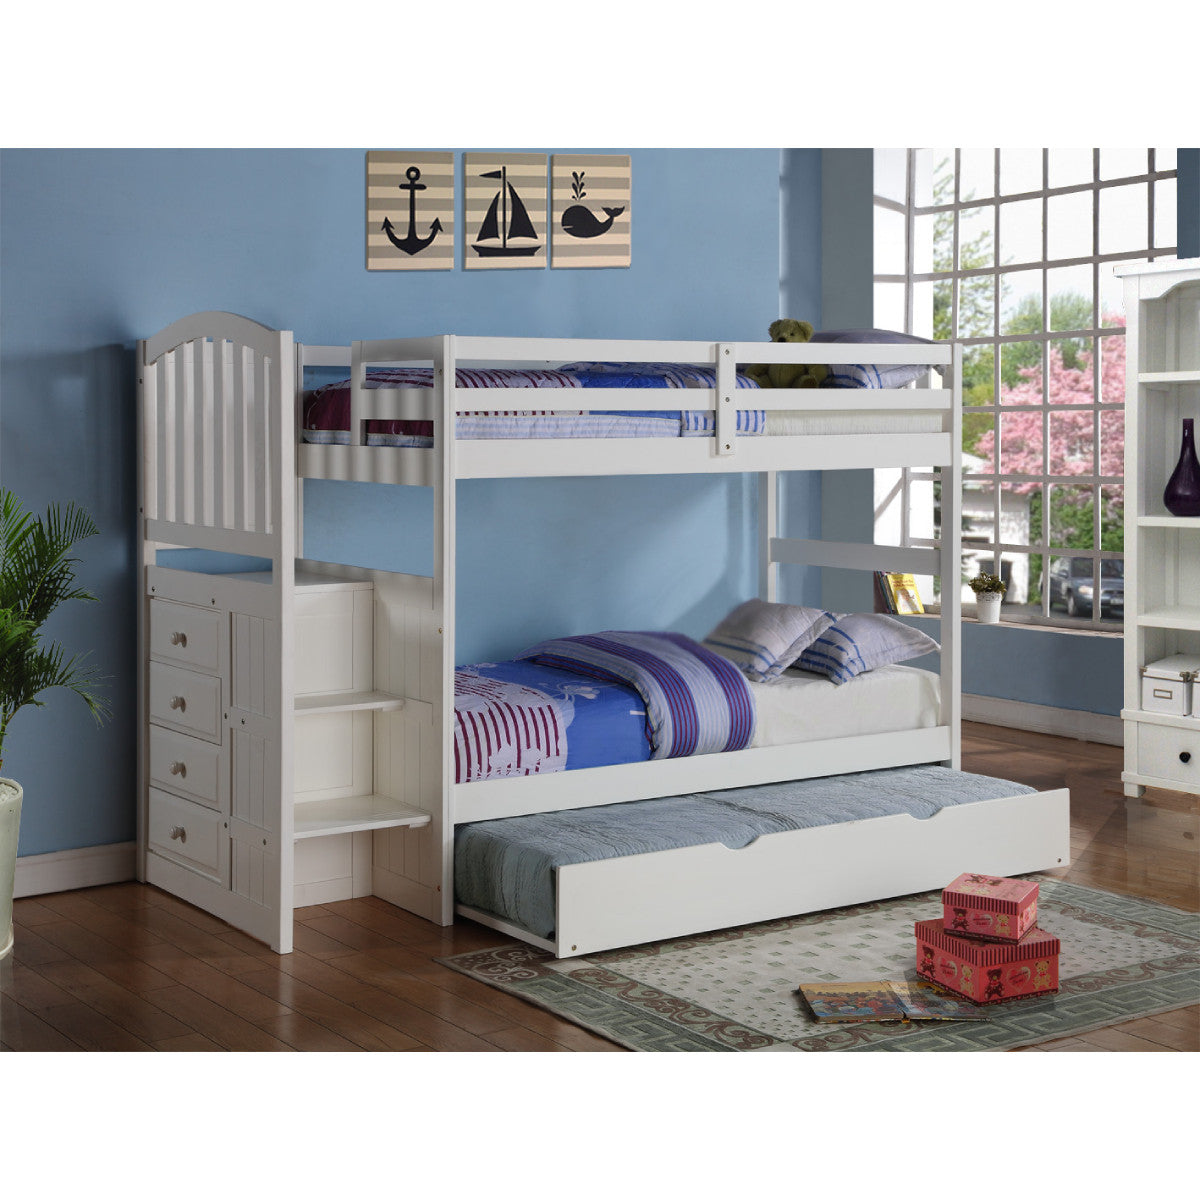 ARCH MISSION STAIRWAY BUNKBED WITH TRUNDLE BED WHITE FINISH